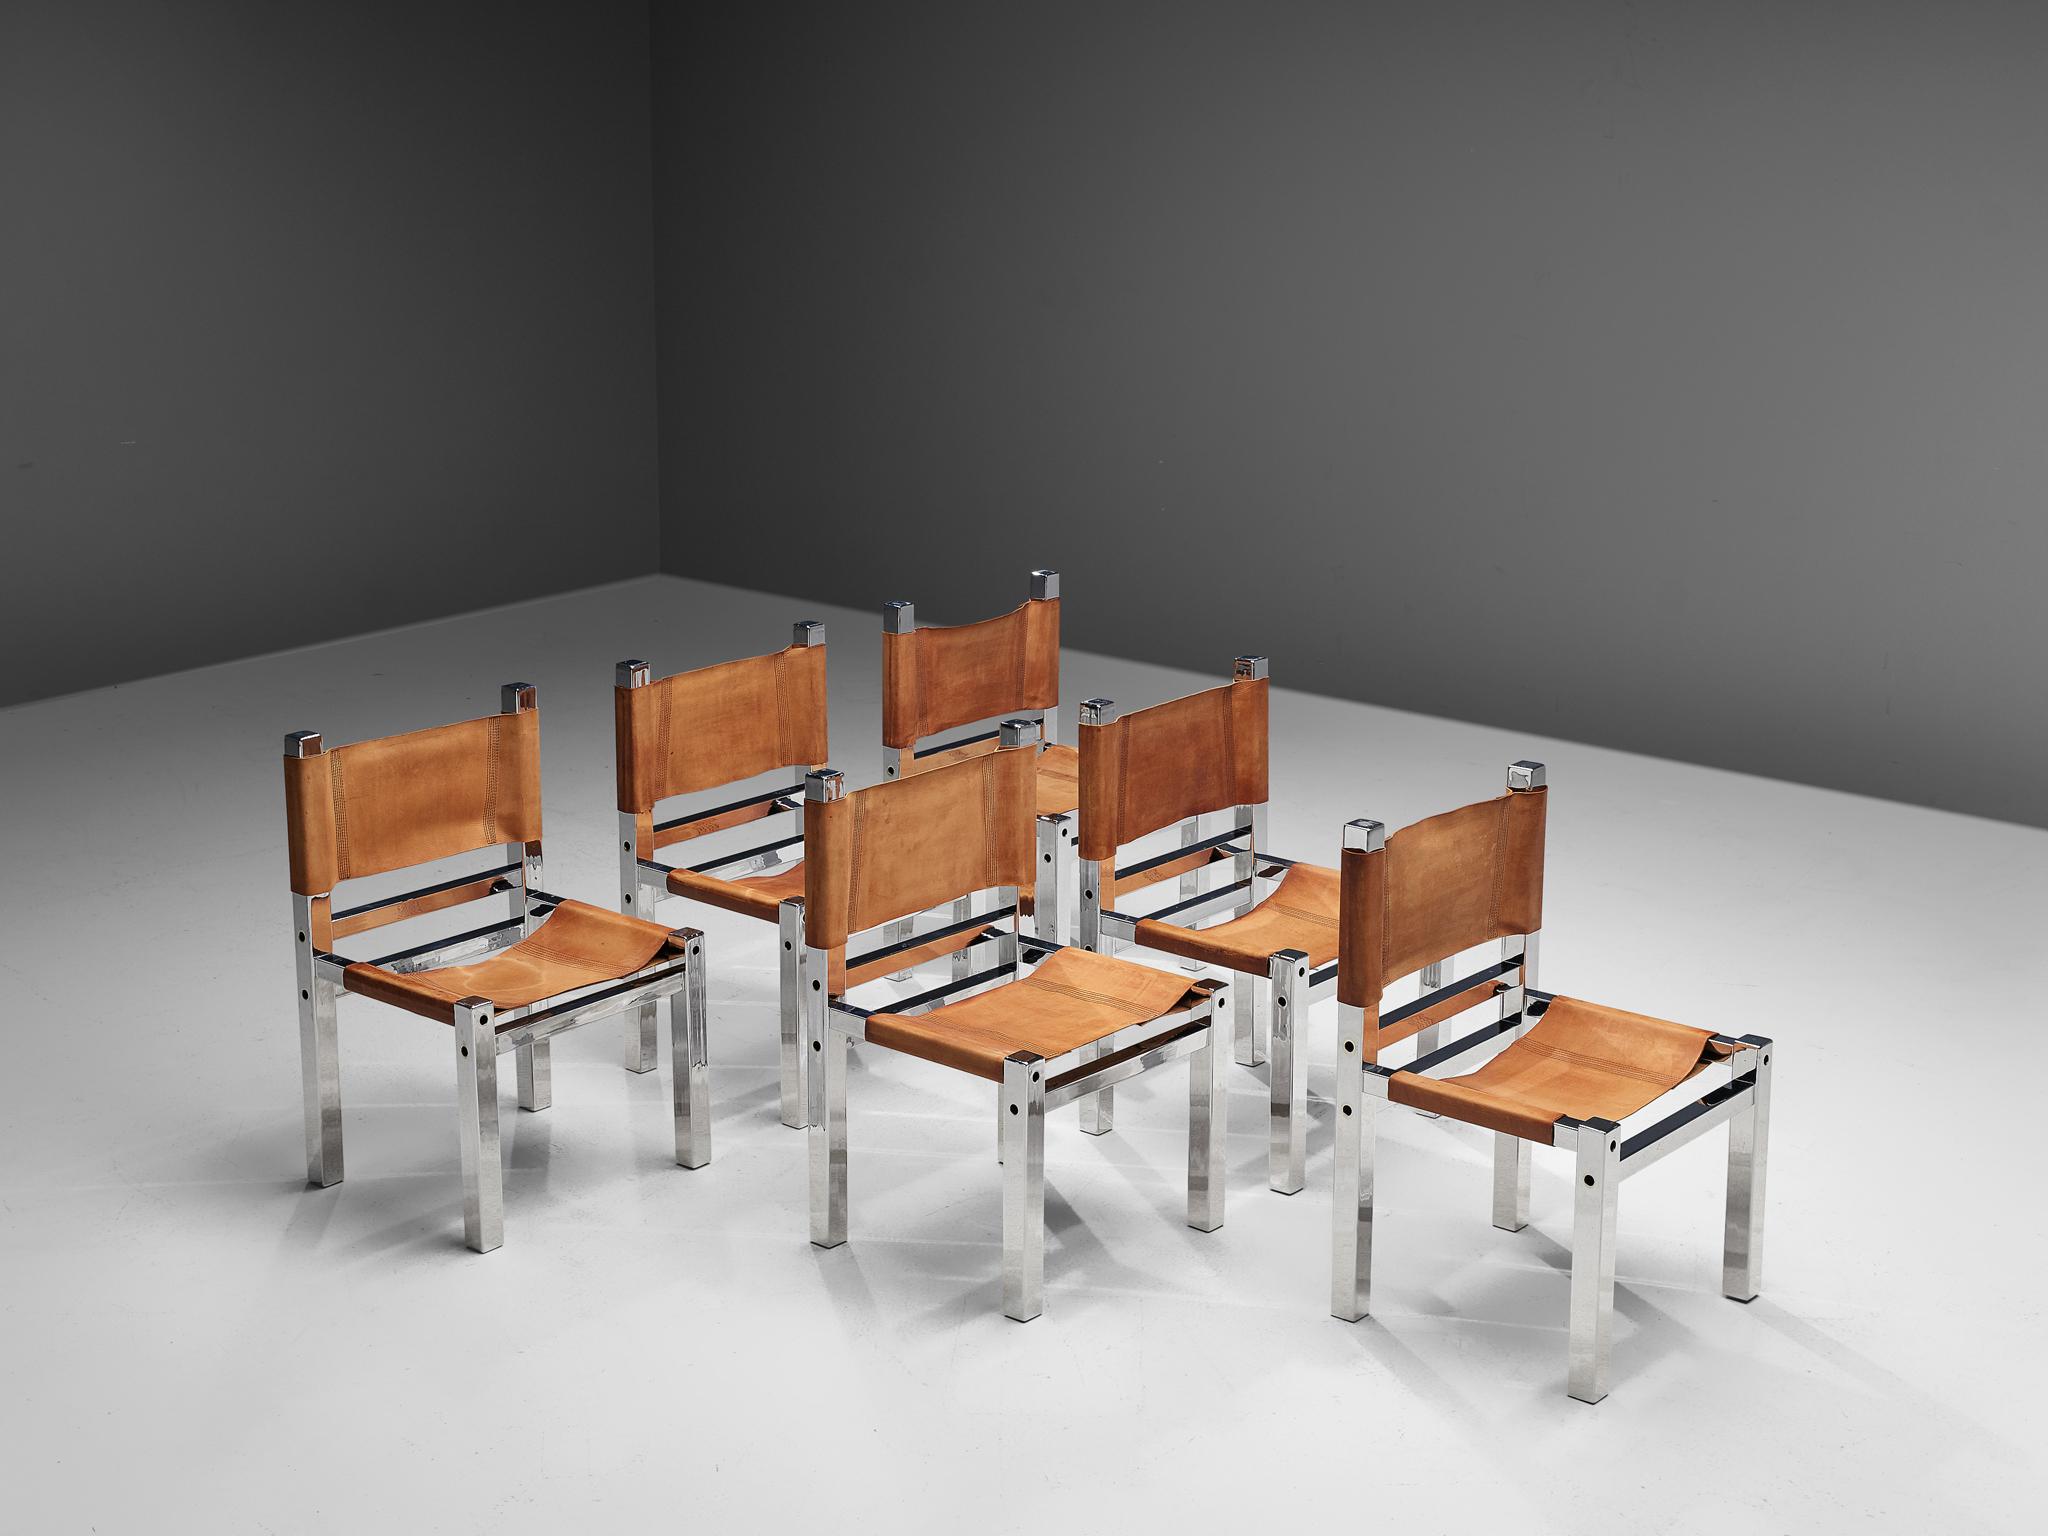 Set of six dining chairs, chromed metal and leather, Italy, 1970s

An extravagant set of dining chairs, featuring a sturdy and robust frame metal of chromed metal. The frame consists of thick square tubes that makes the chairs very stabile and